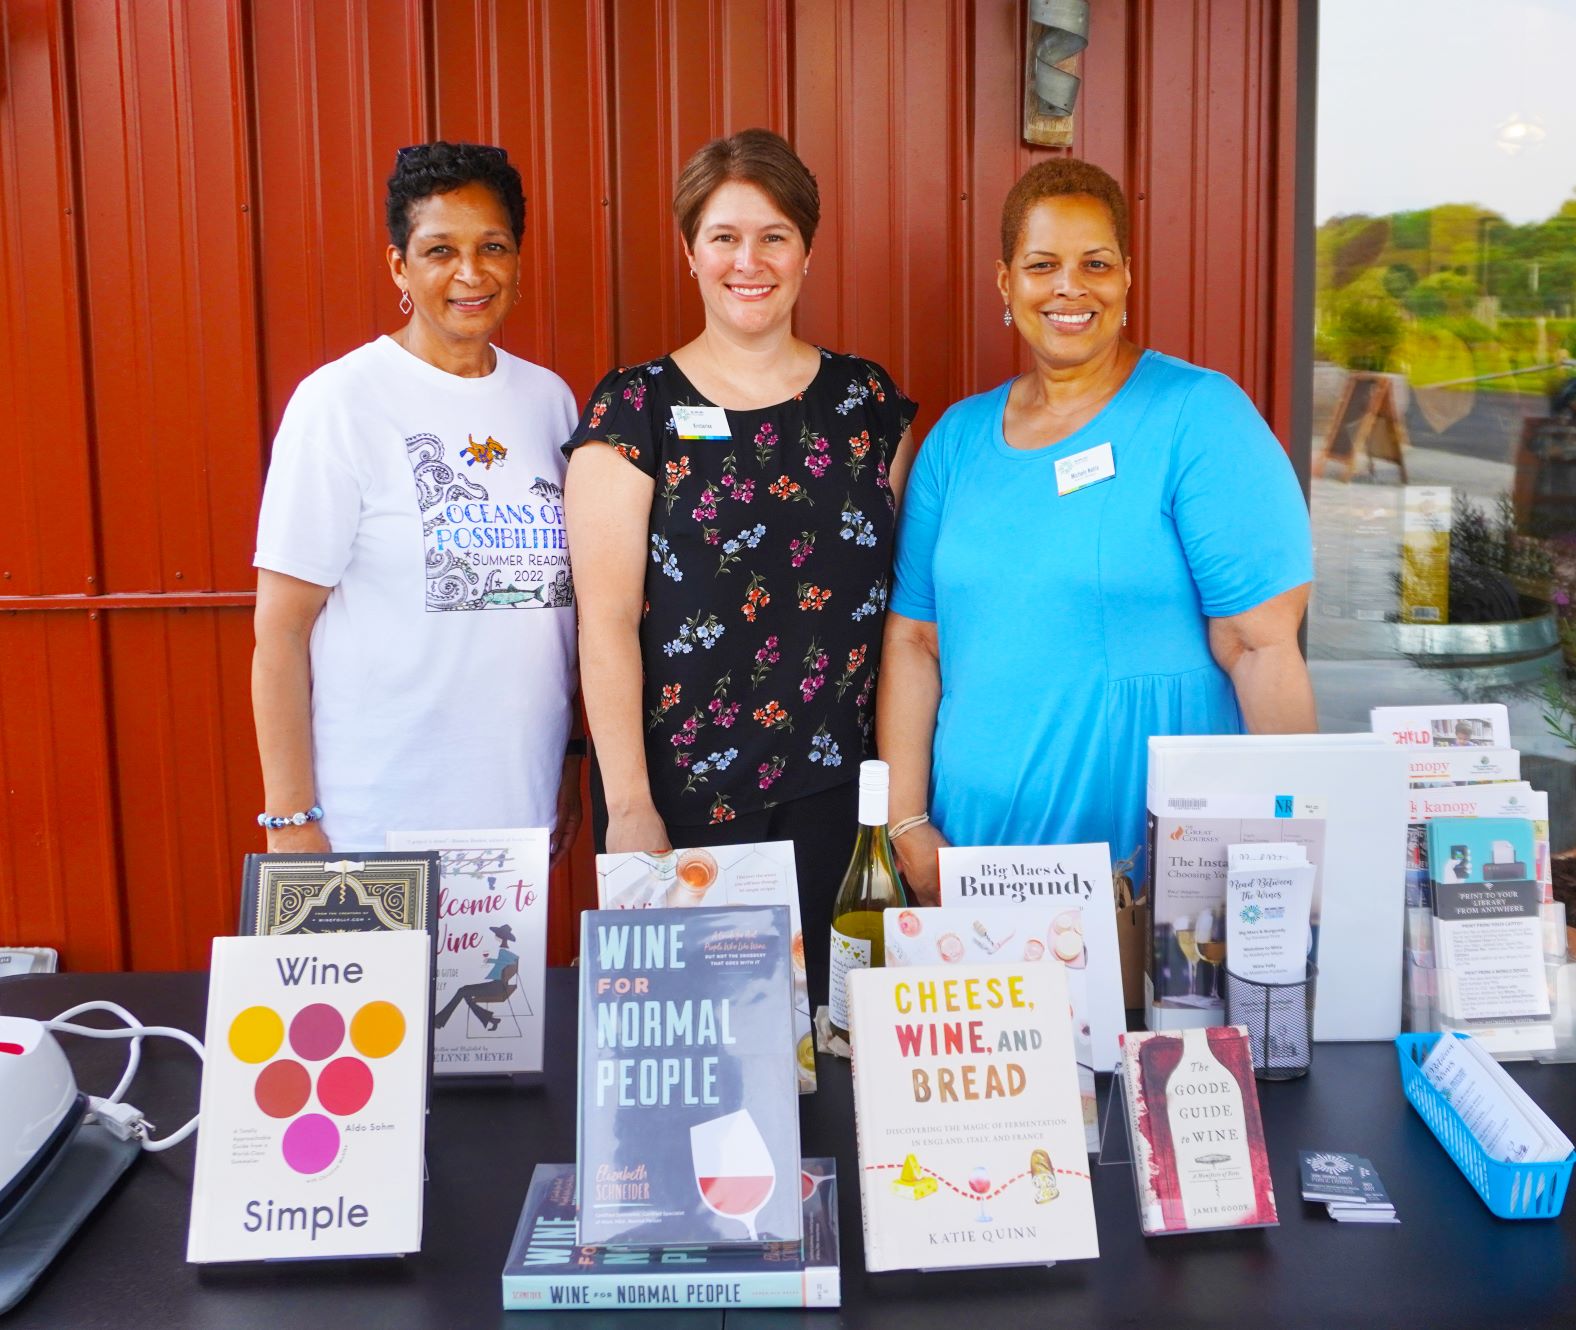 Three librarians from Eastport Annapolis Neck Branch posing for photo behind table displaying books on wine.